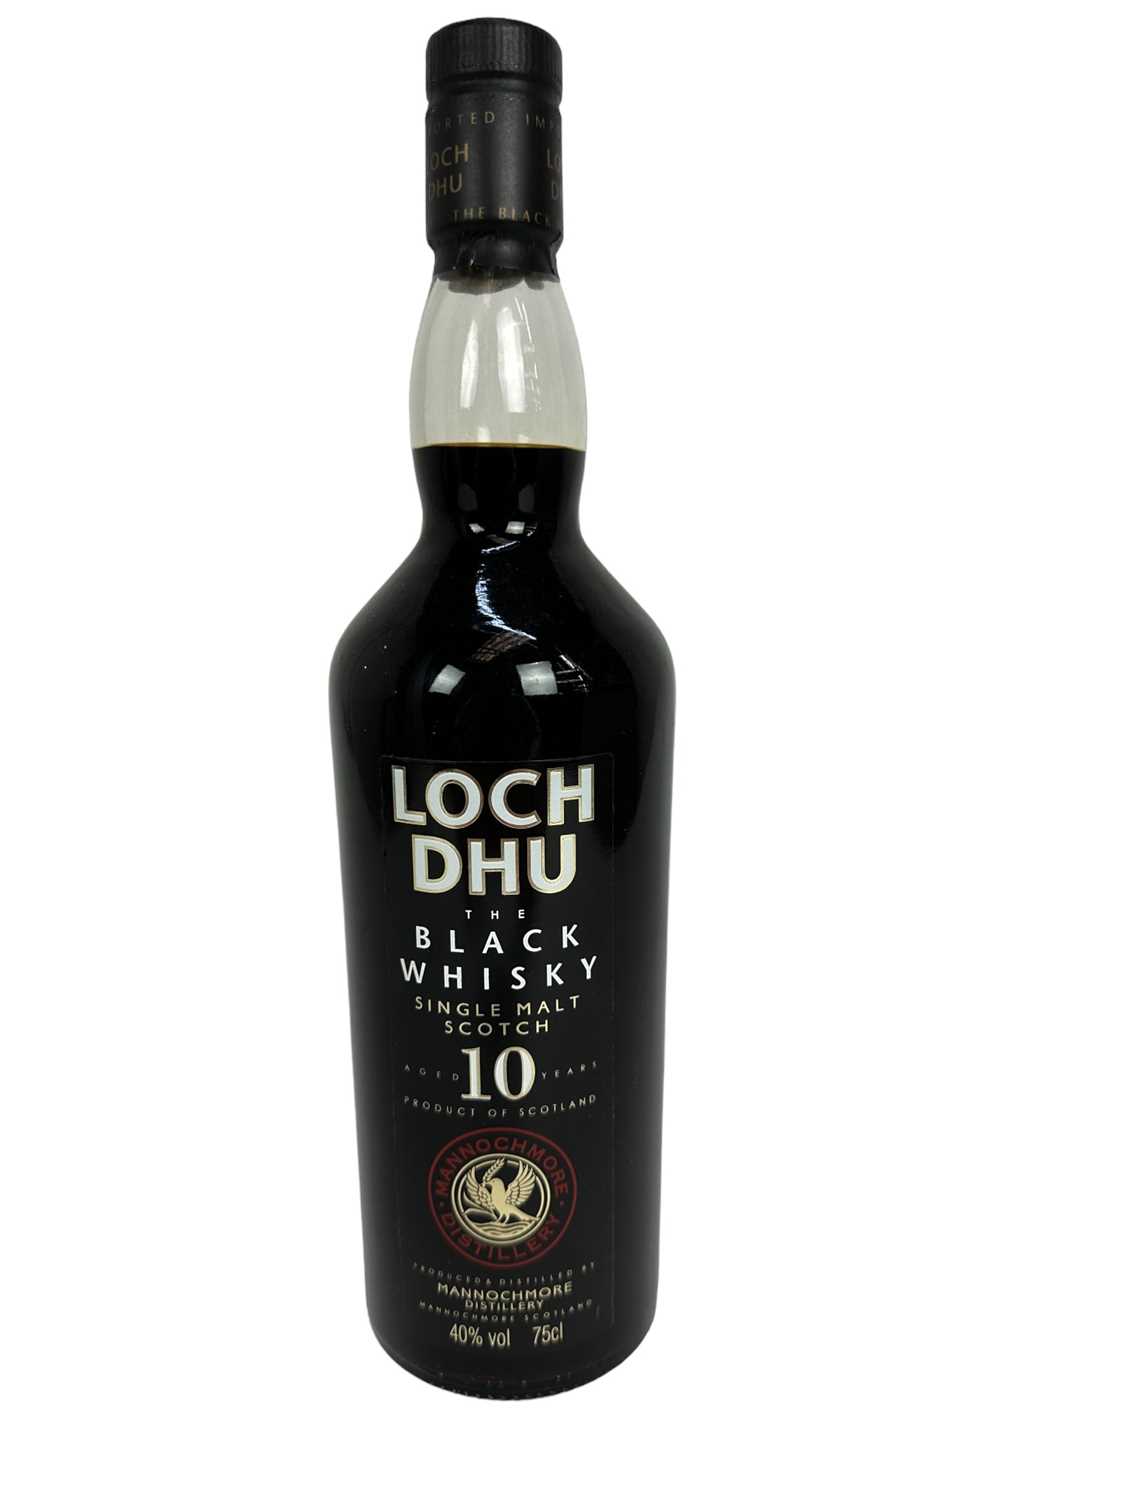 Lot 31 - Whisky - one bottle, Loch Dhu, The Black Whisky, aged 10 years, 40%, 75cl